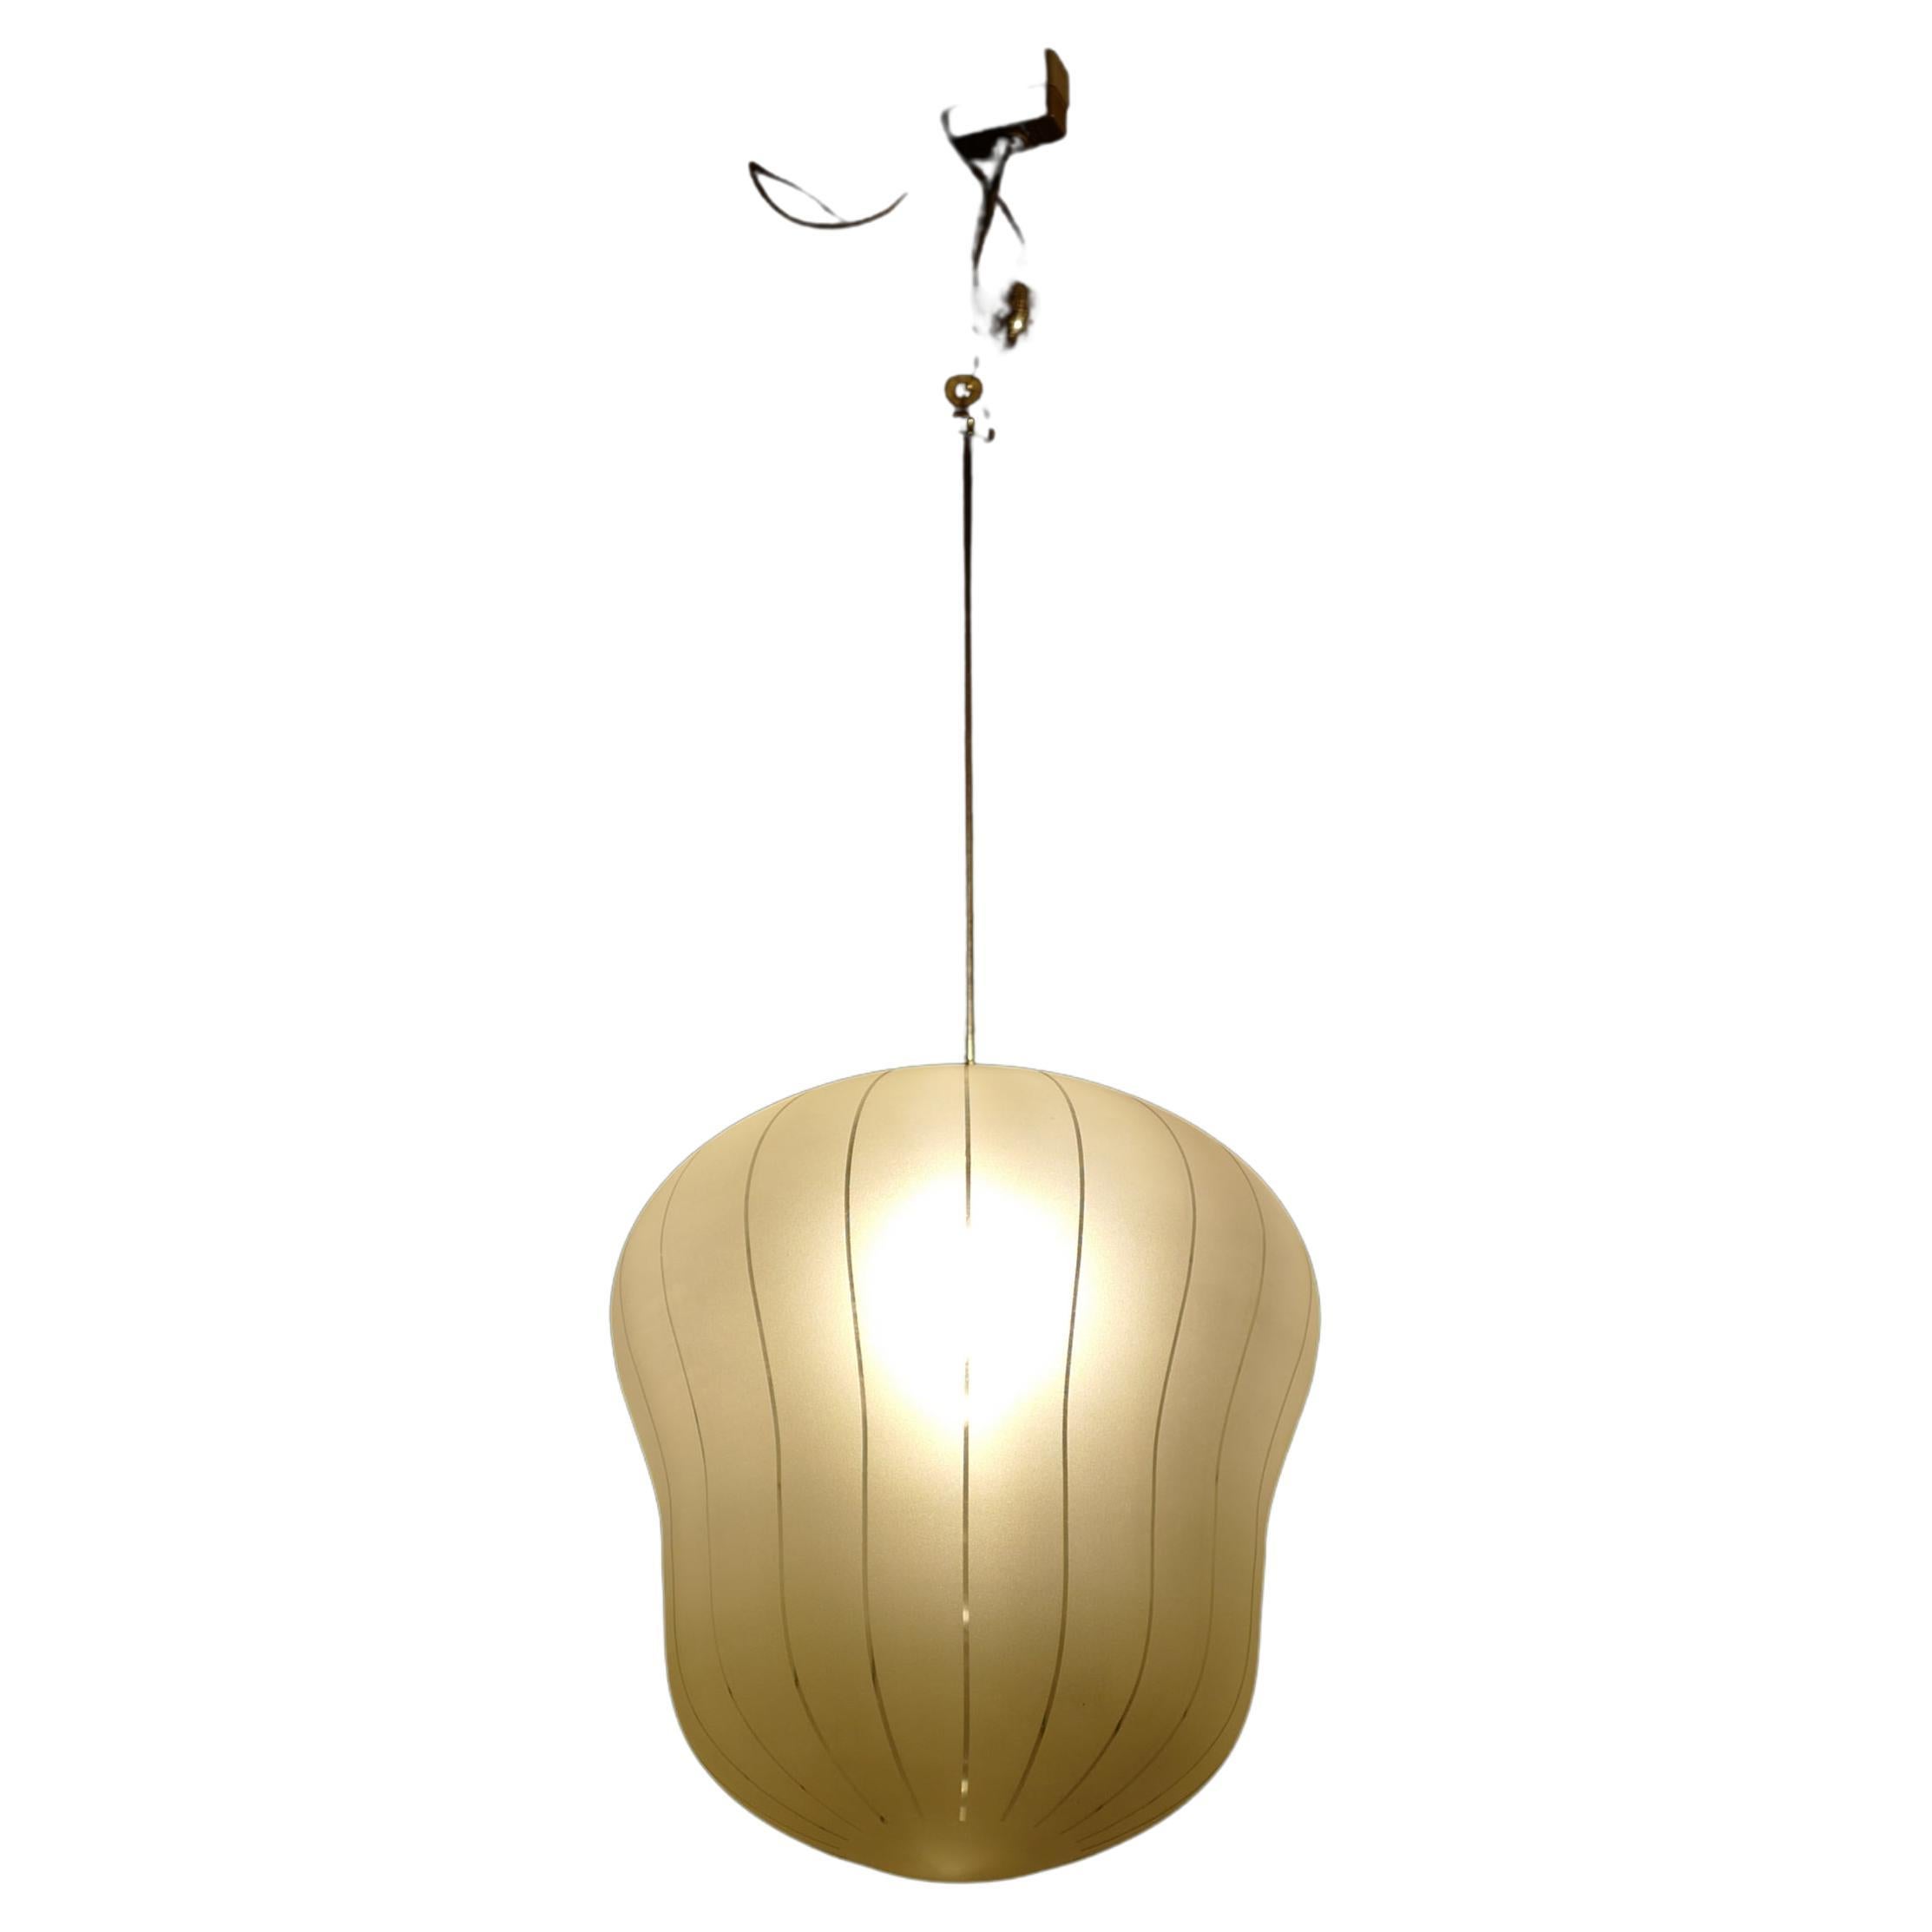 Gunnel Nyman 40's frosted glass pendant lamp For Sale